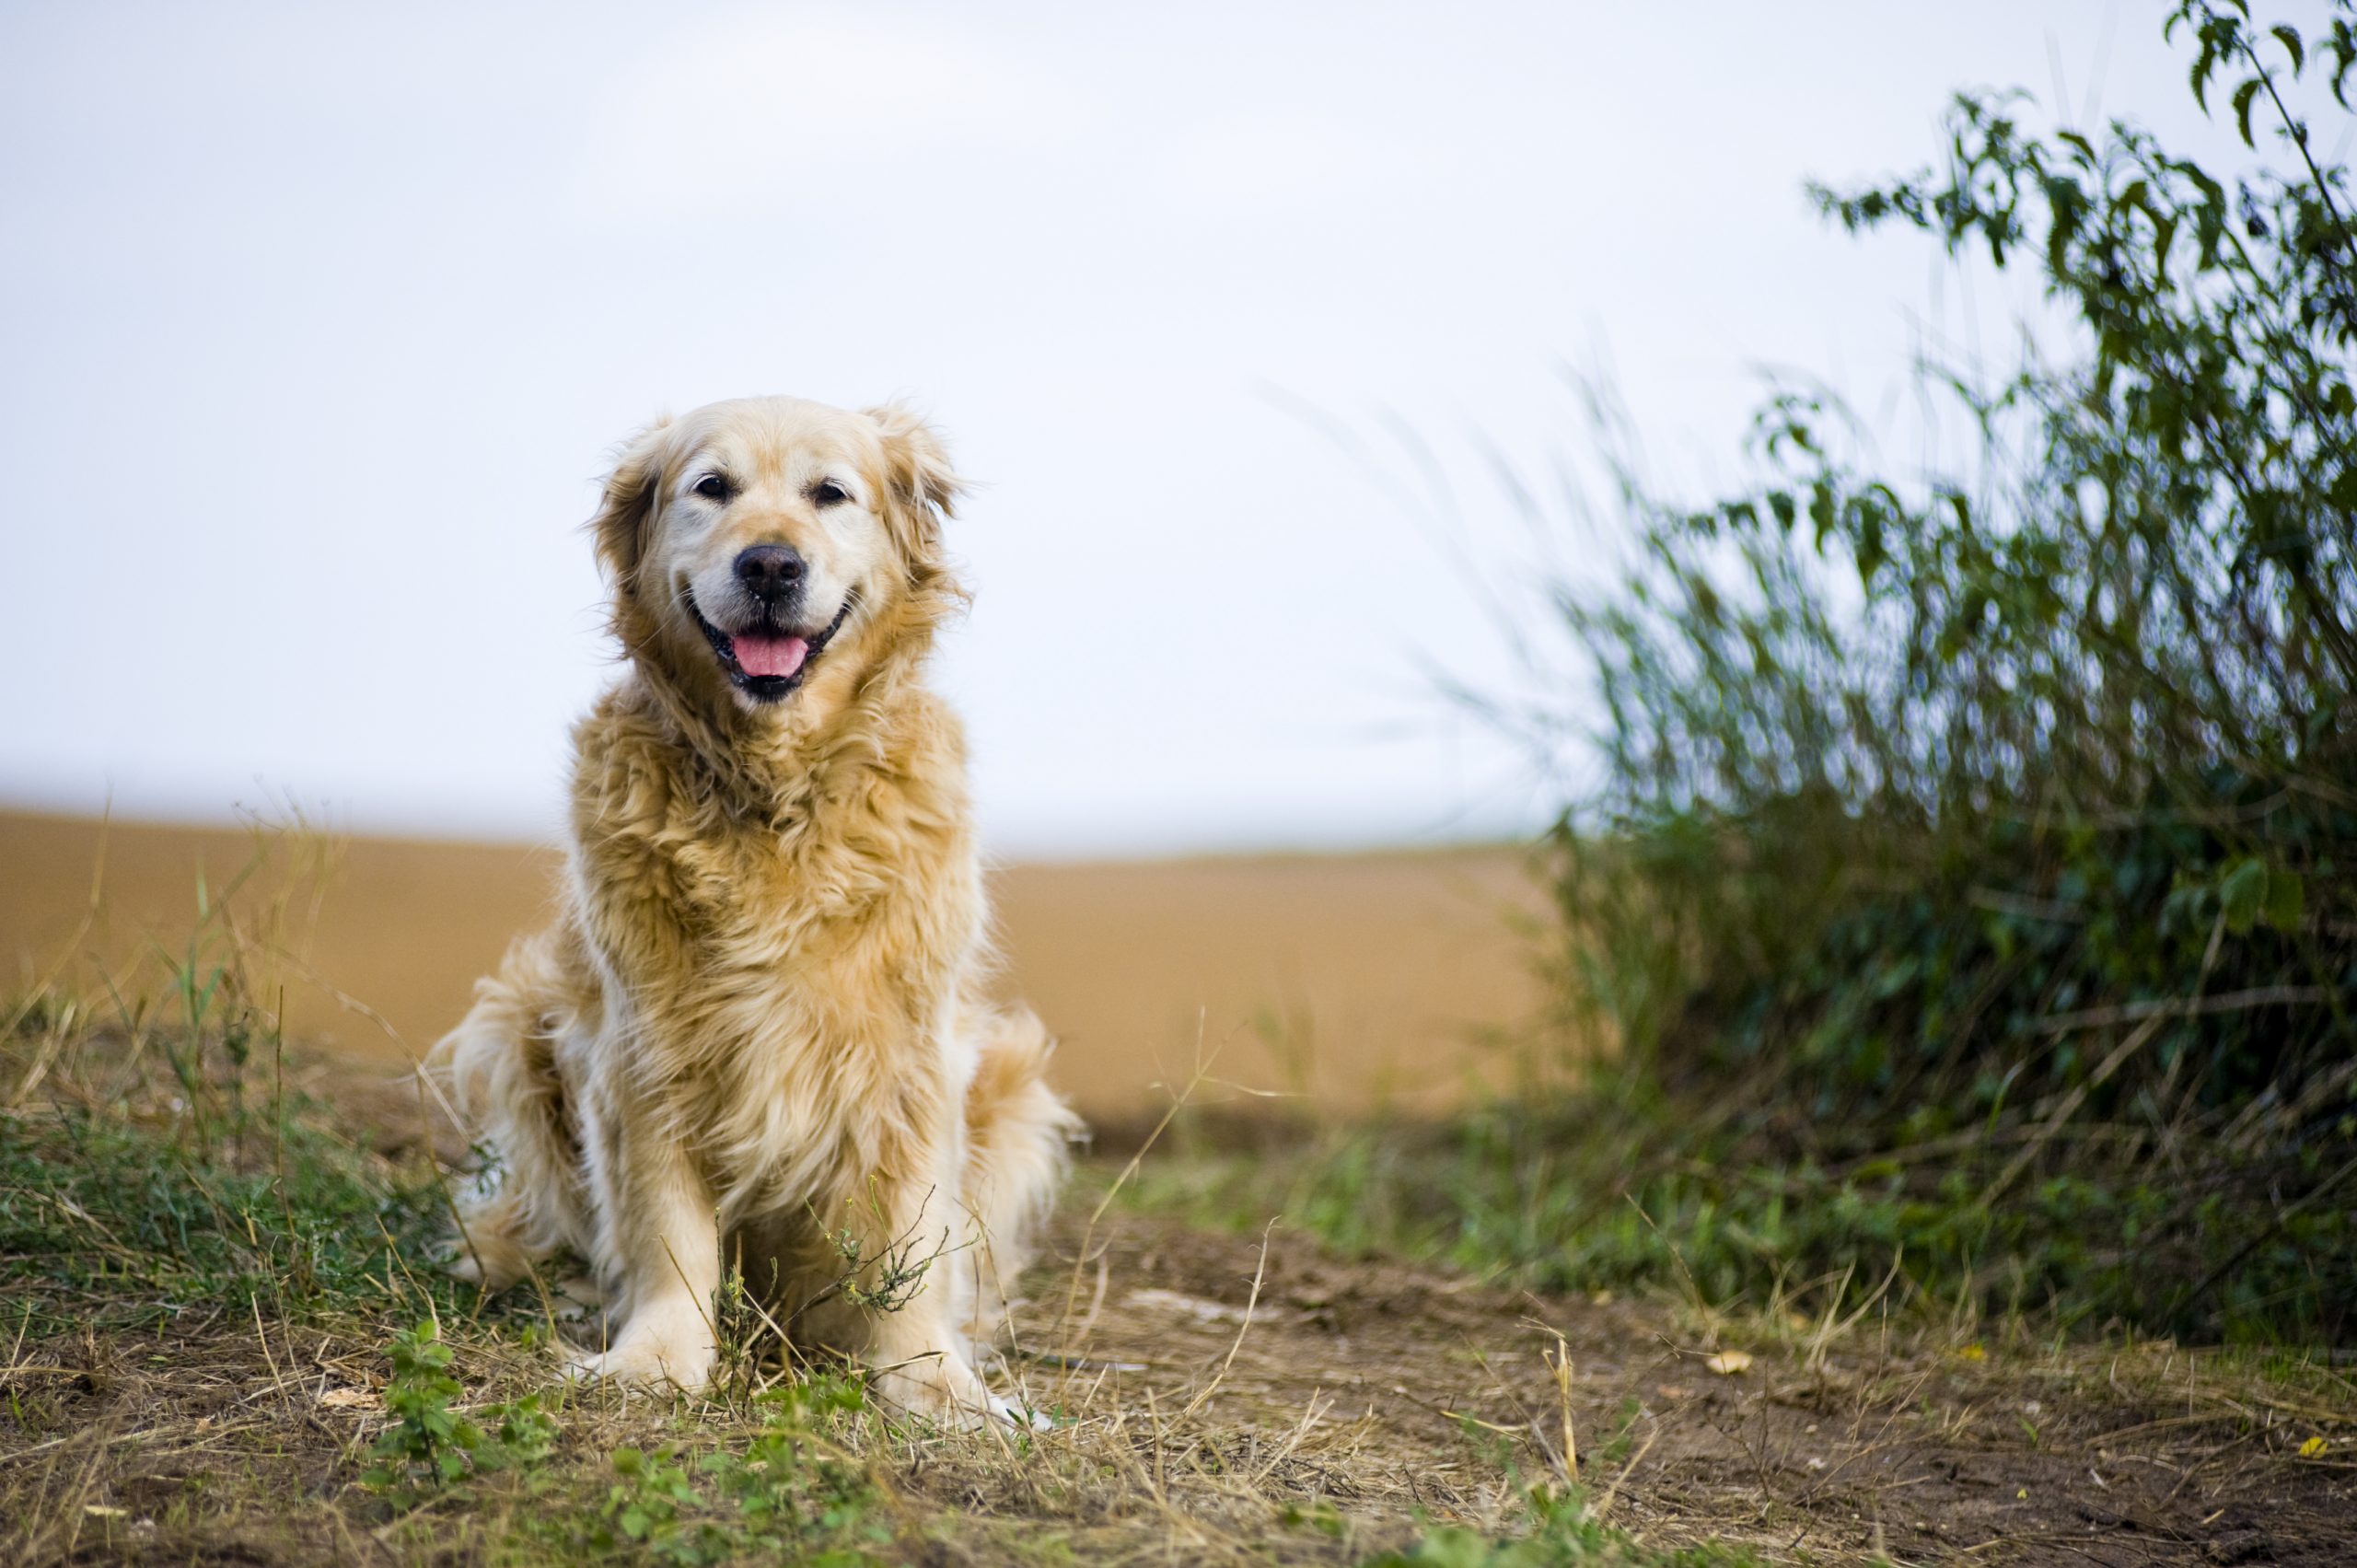 Hind Leg Weakness: When Your Dog's Back Legs Give Out - Petful